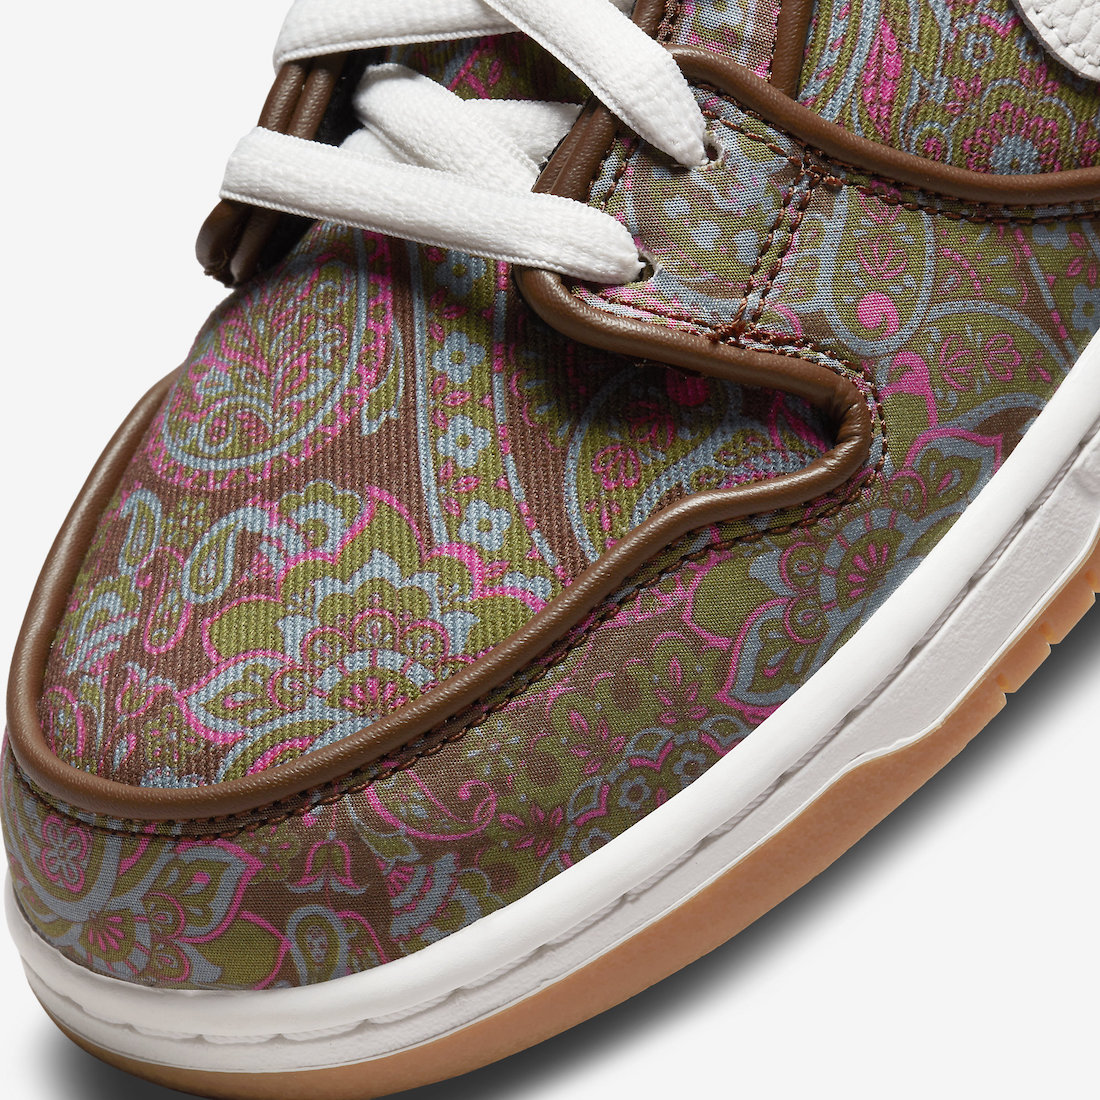 Nike SB Dunk Low Paisley DH7534-200 Release Date Price